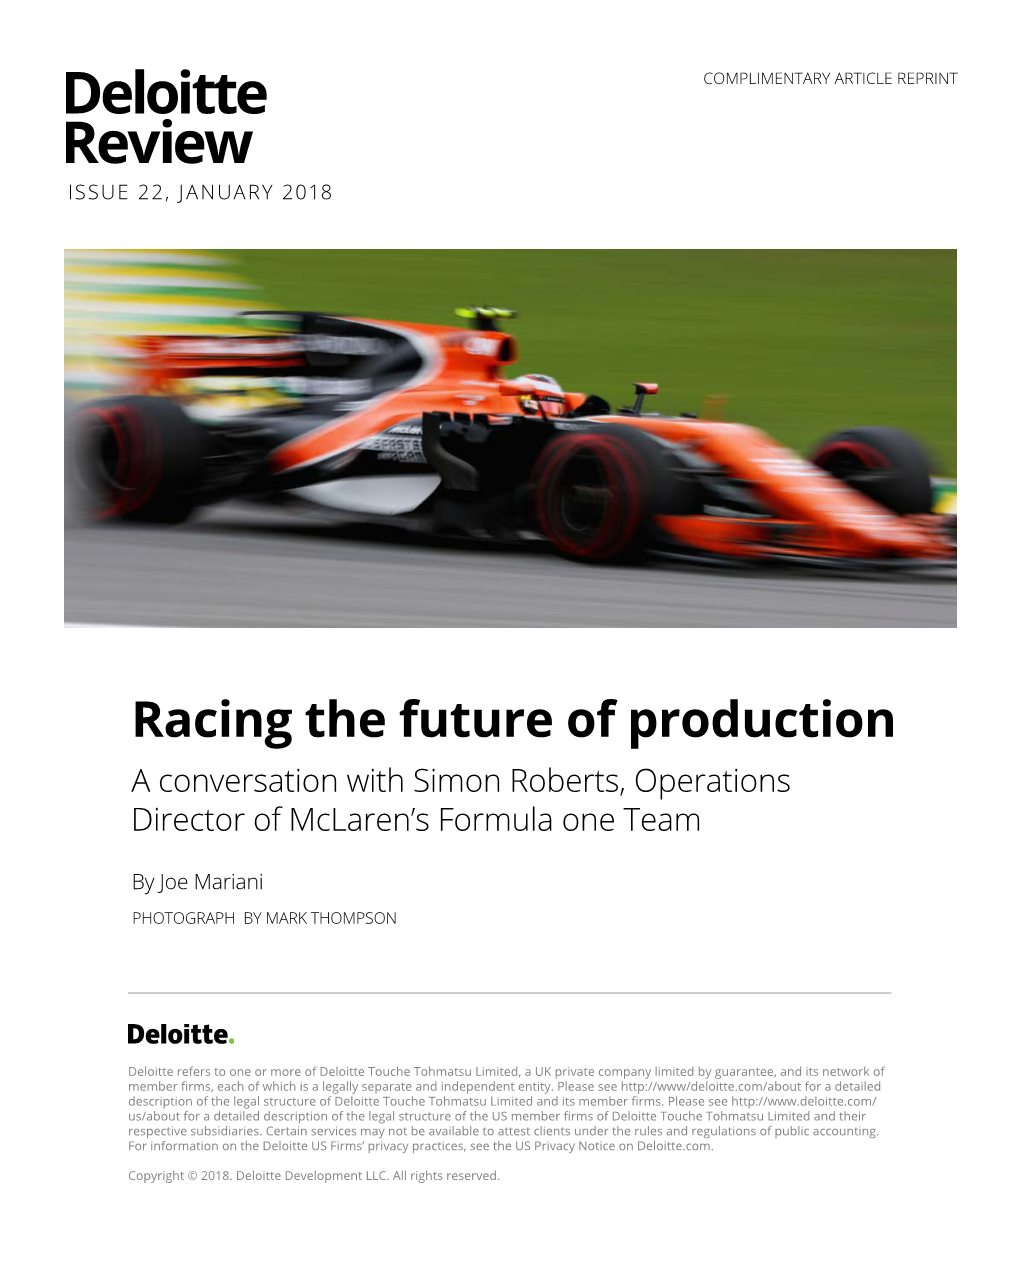 Racing the Future of Production a Conversation with Simon Roberts, Operations Director of Mclaren’S Formula One Team